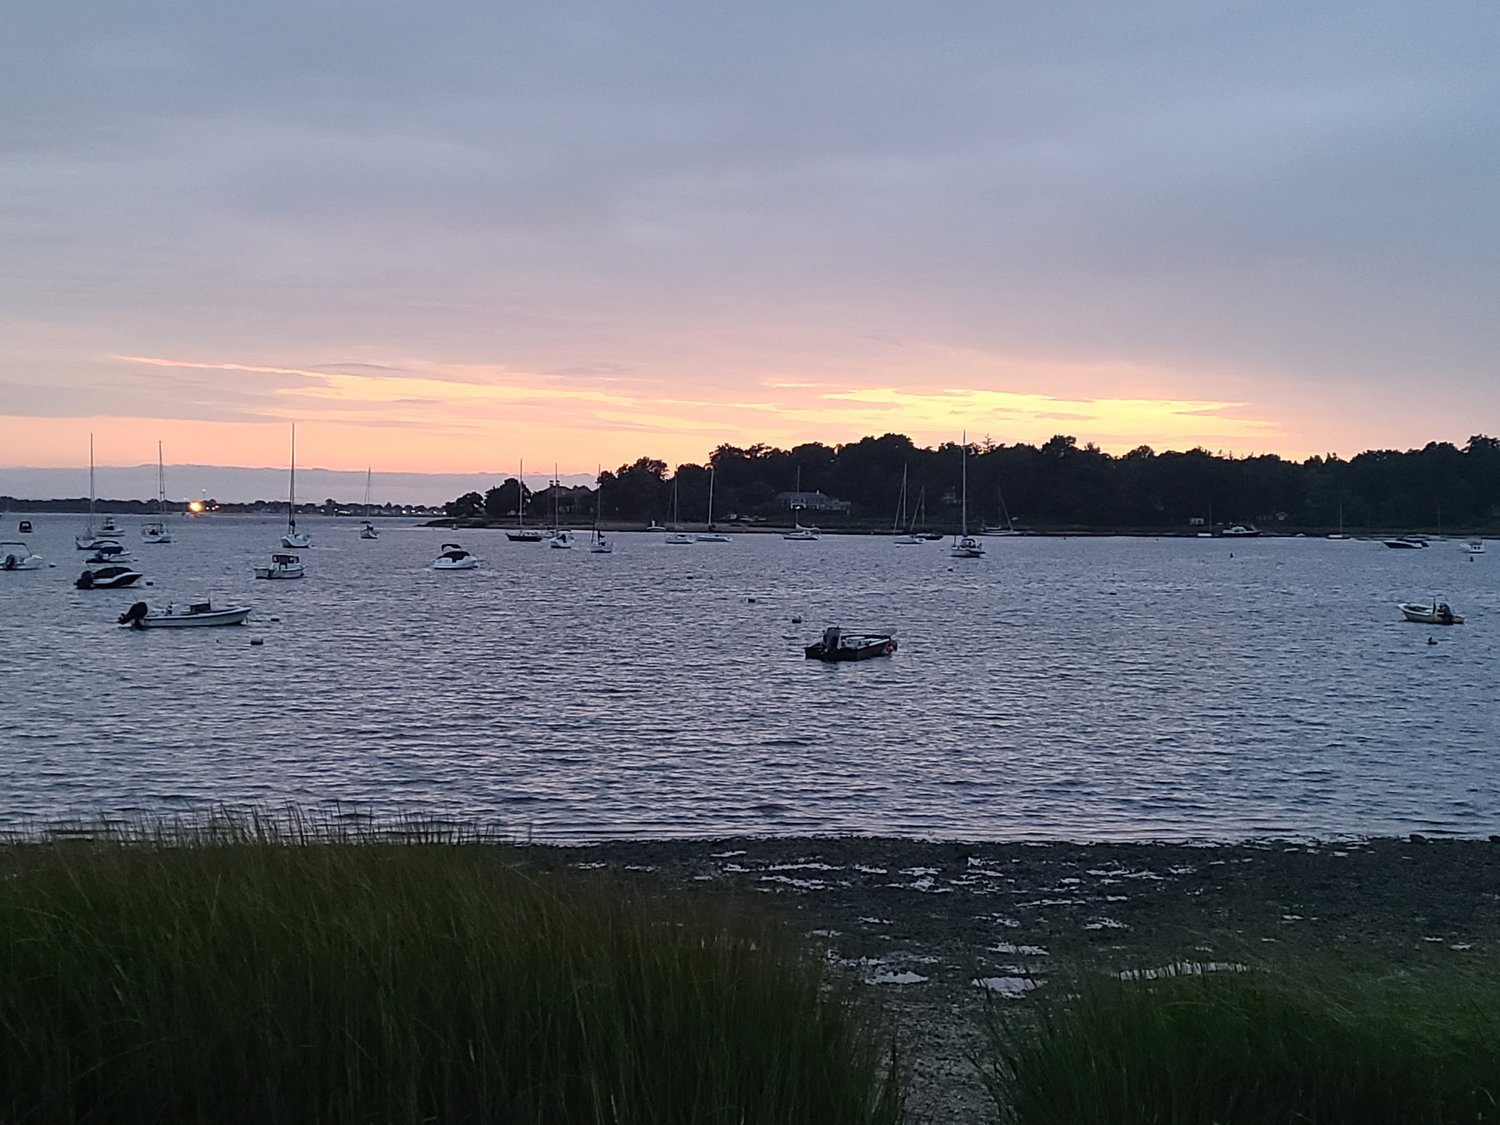 At daybreak the sound in Bayville looked pretty normal, despite Henry.